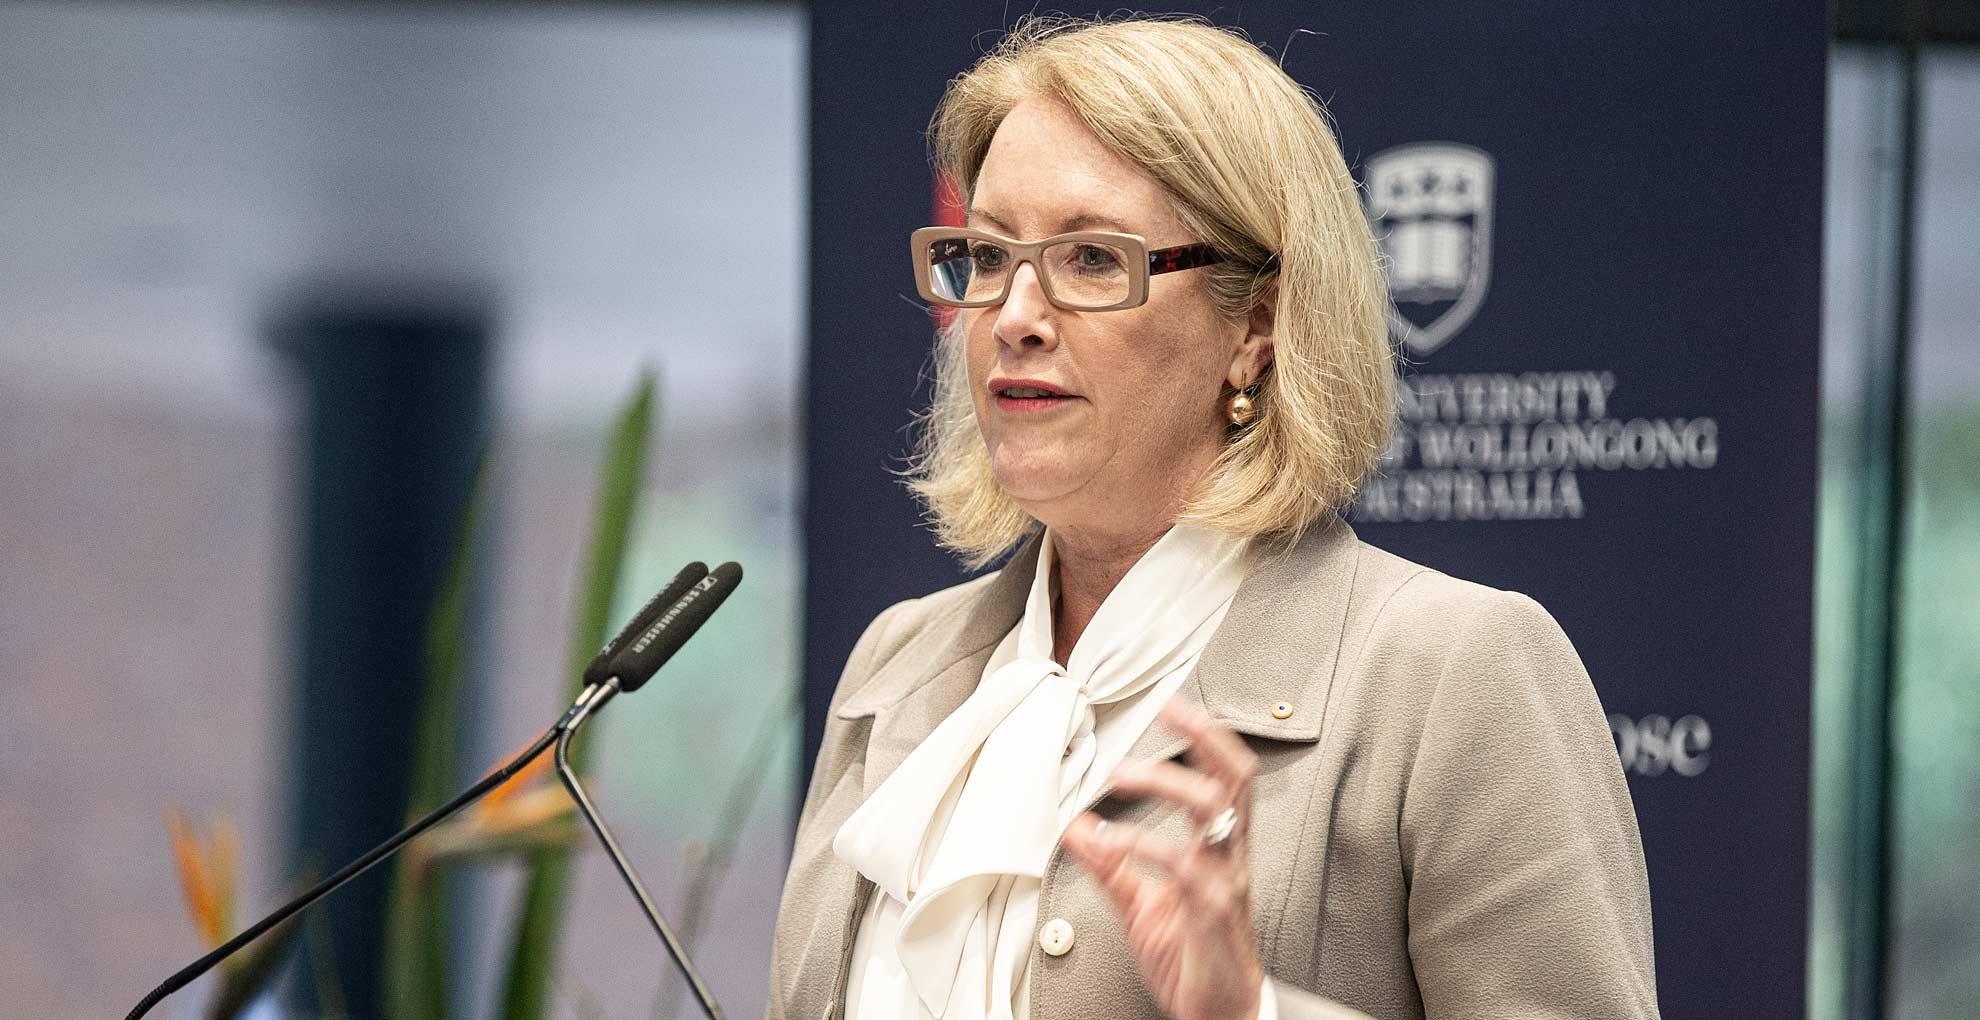 Elizabeth Broderick delivers the keynote address at the Athena SWAN celebration at UOW. Photo: Paul Jones